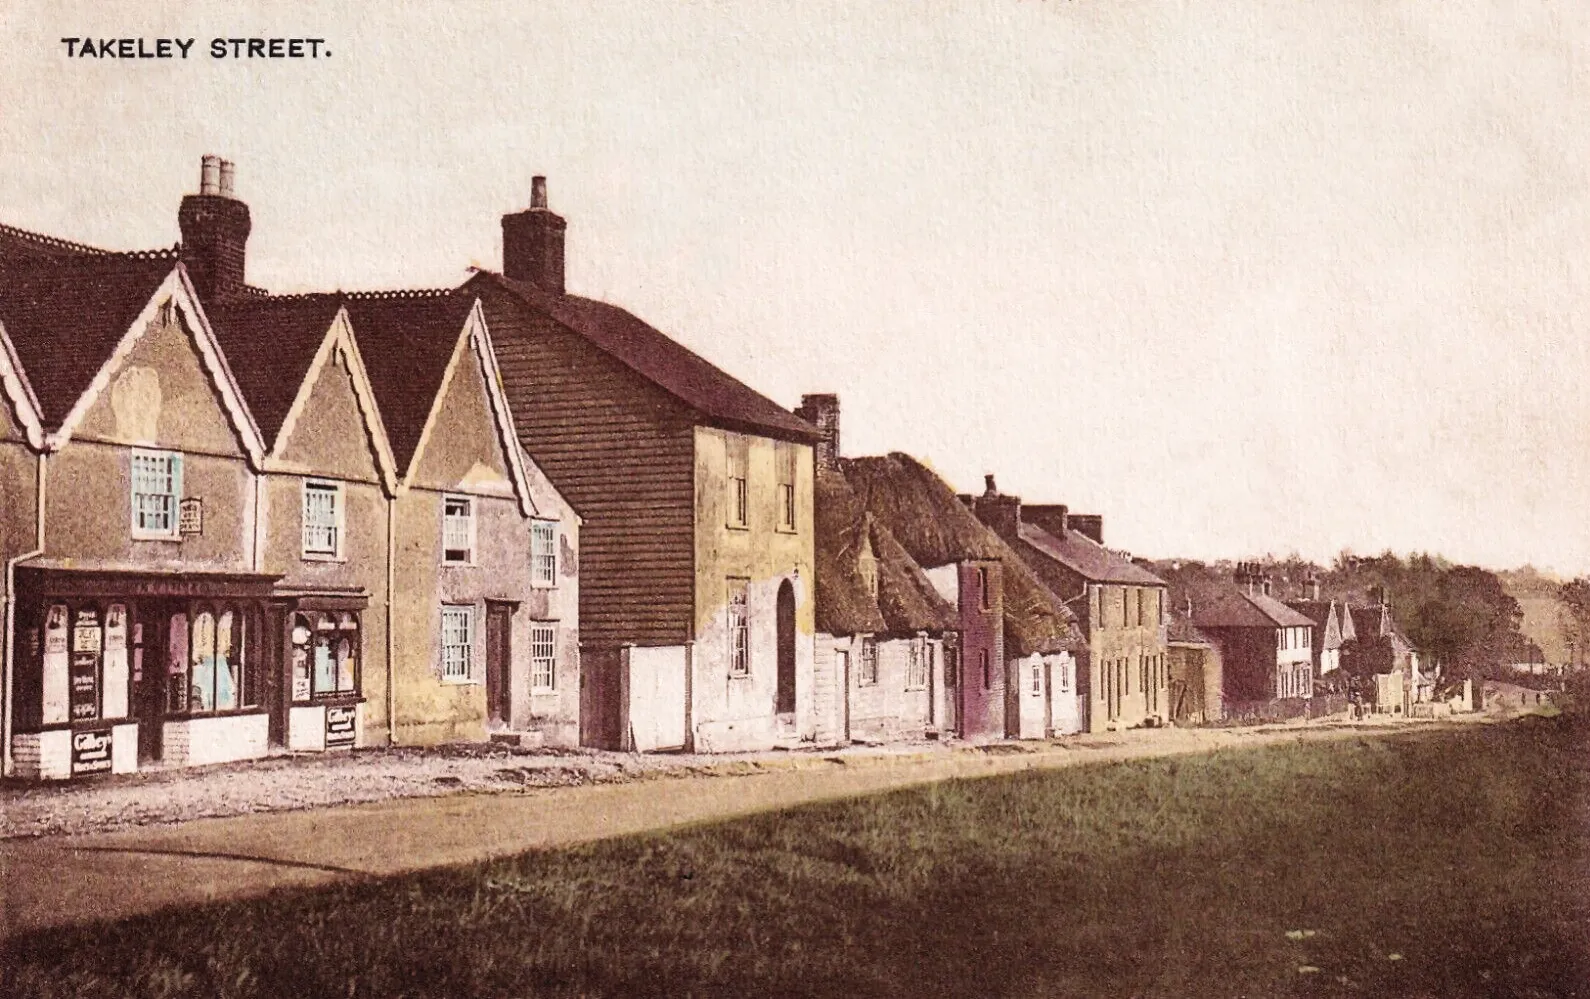 Photo showing: Takeley Street (village) in Essex, England.